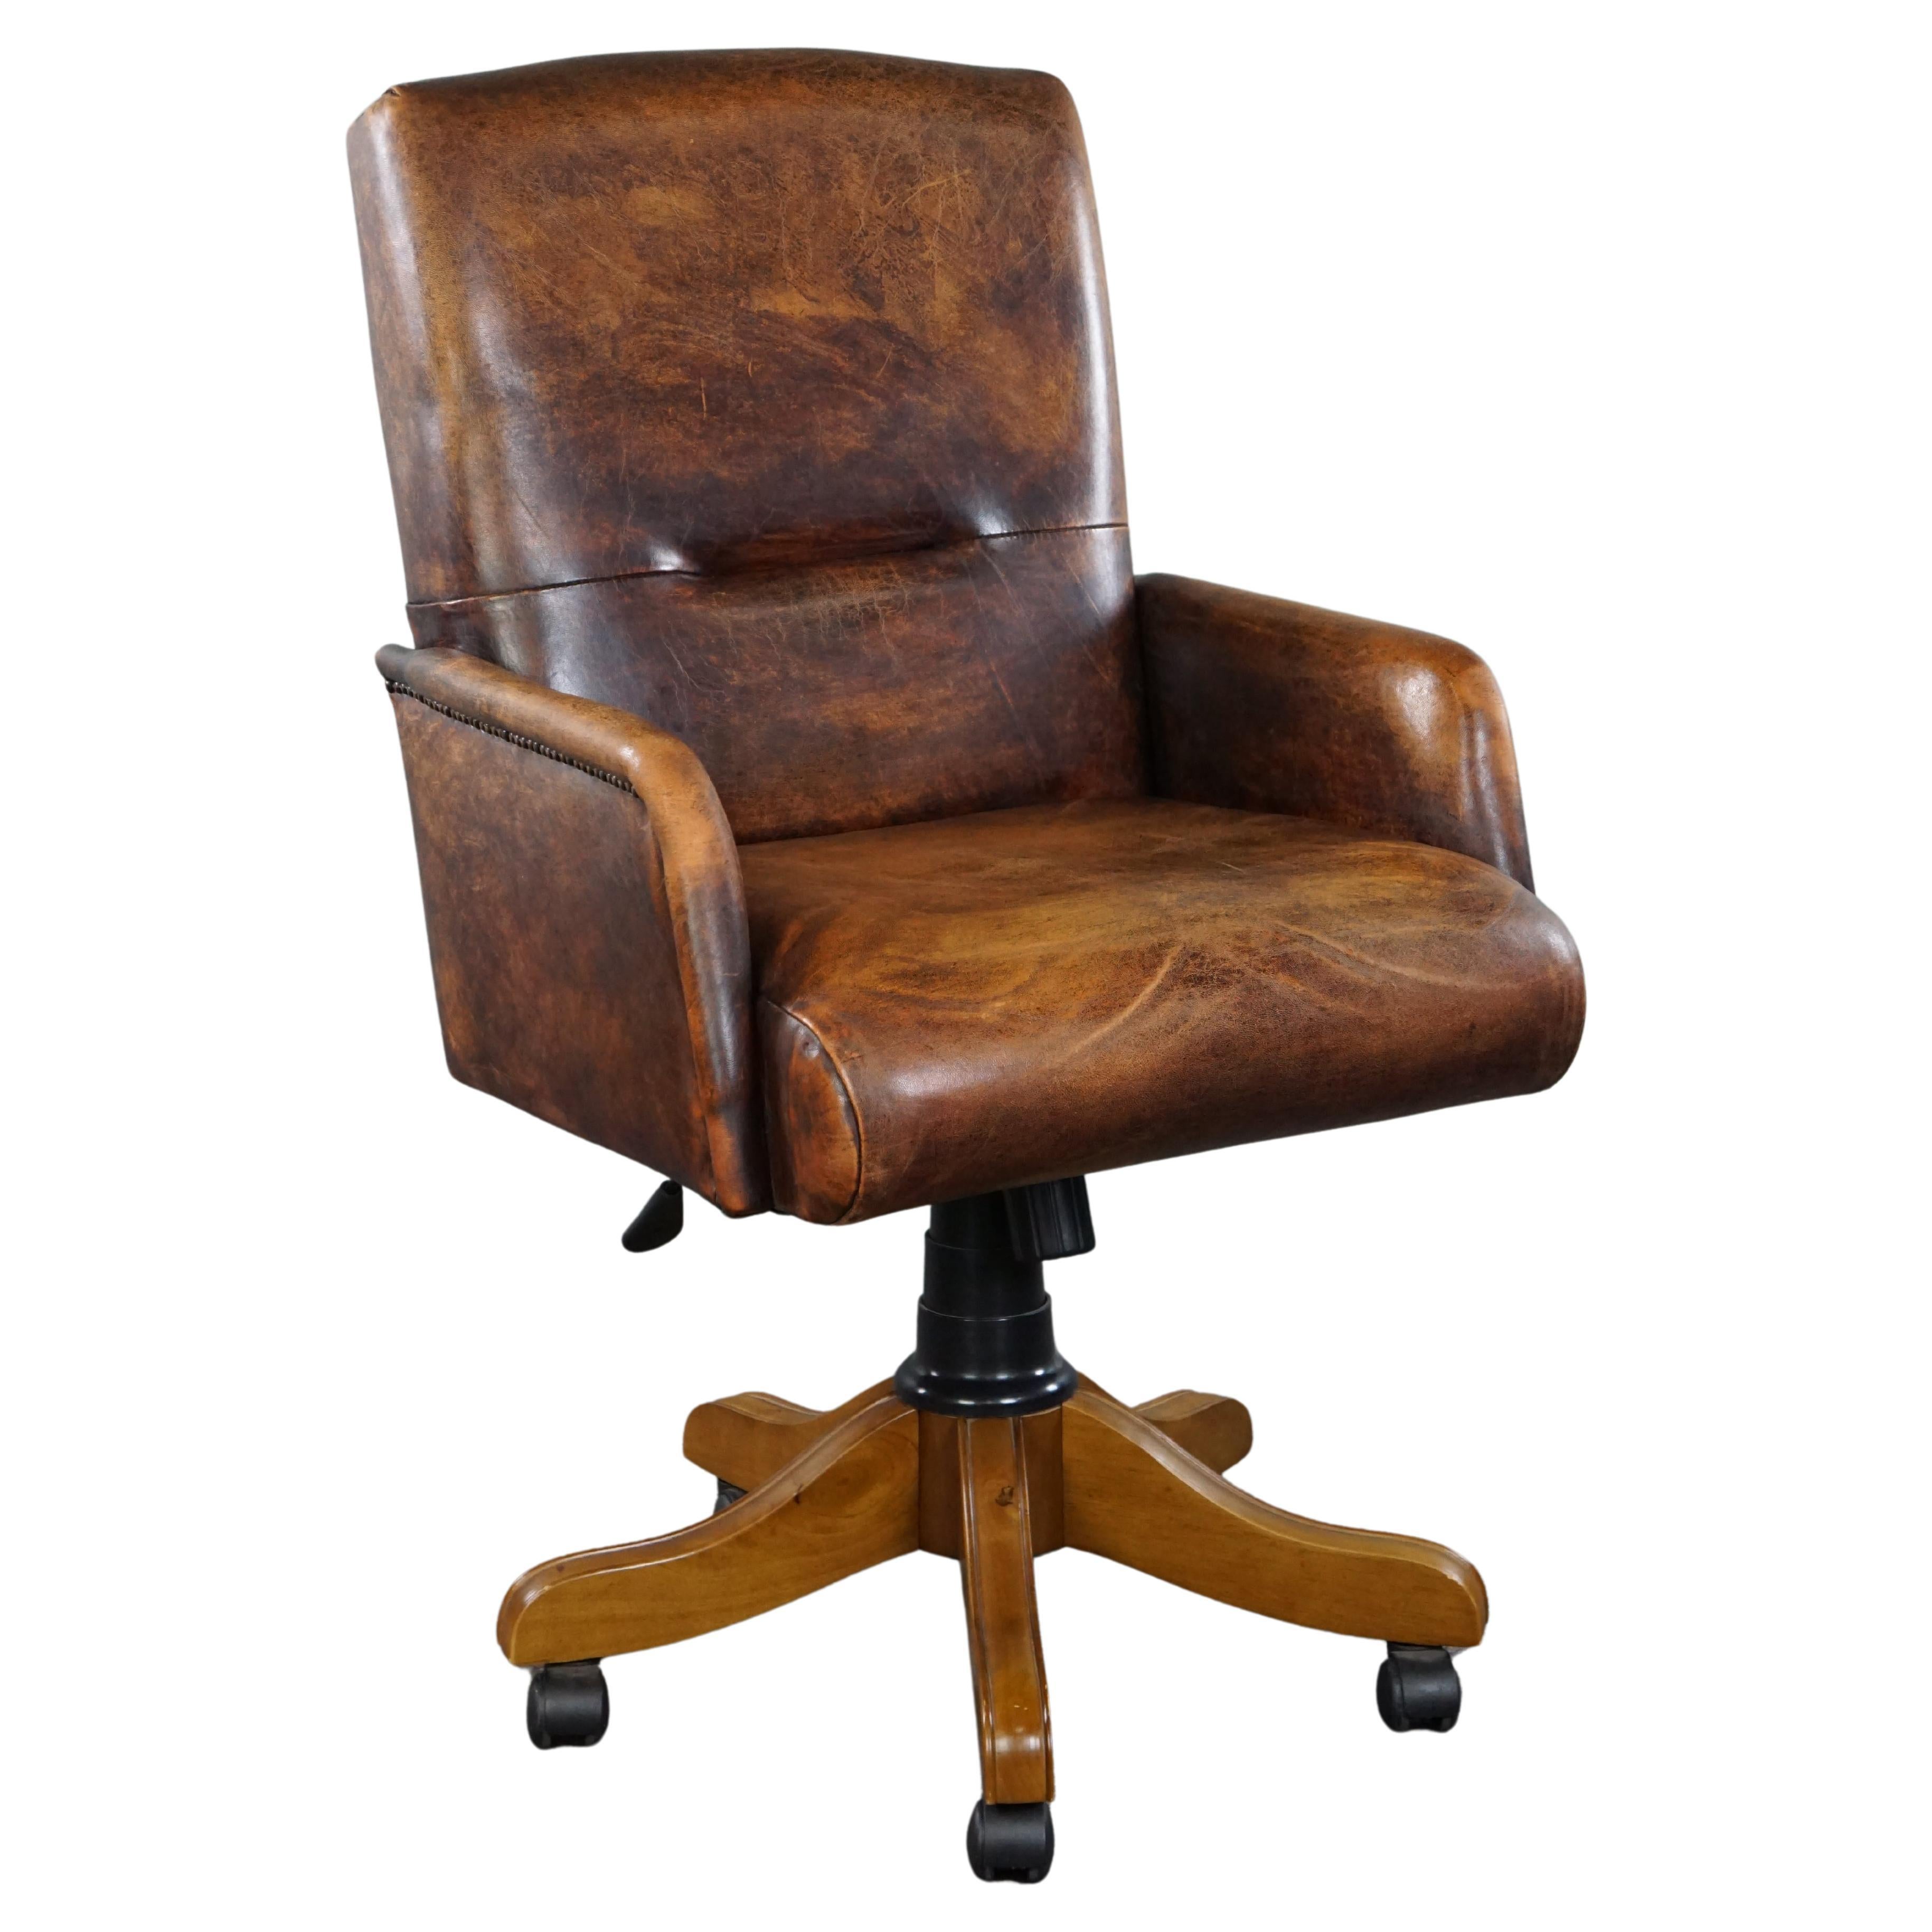 Adjustable sheepskin leather office chair in good condition, English style